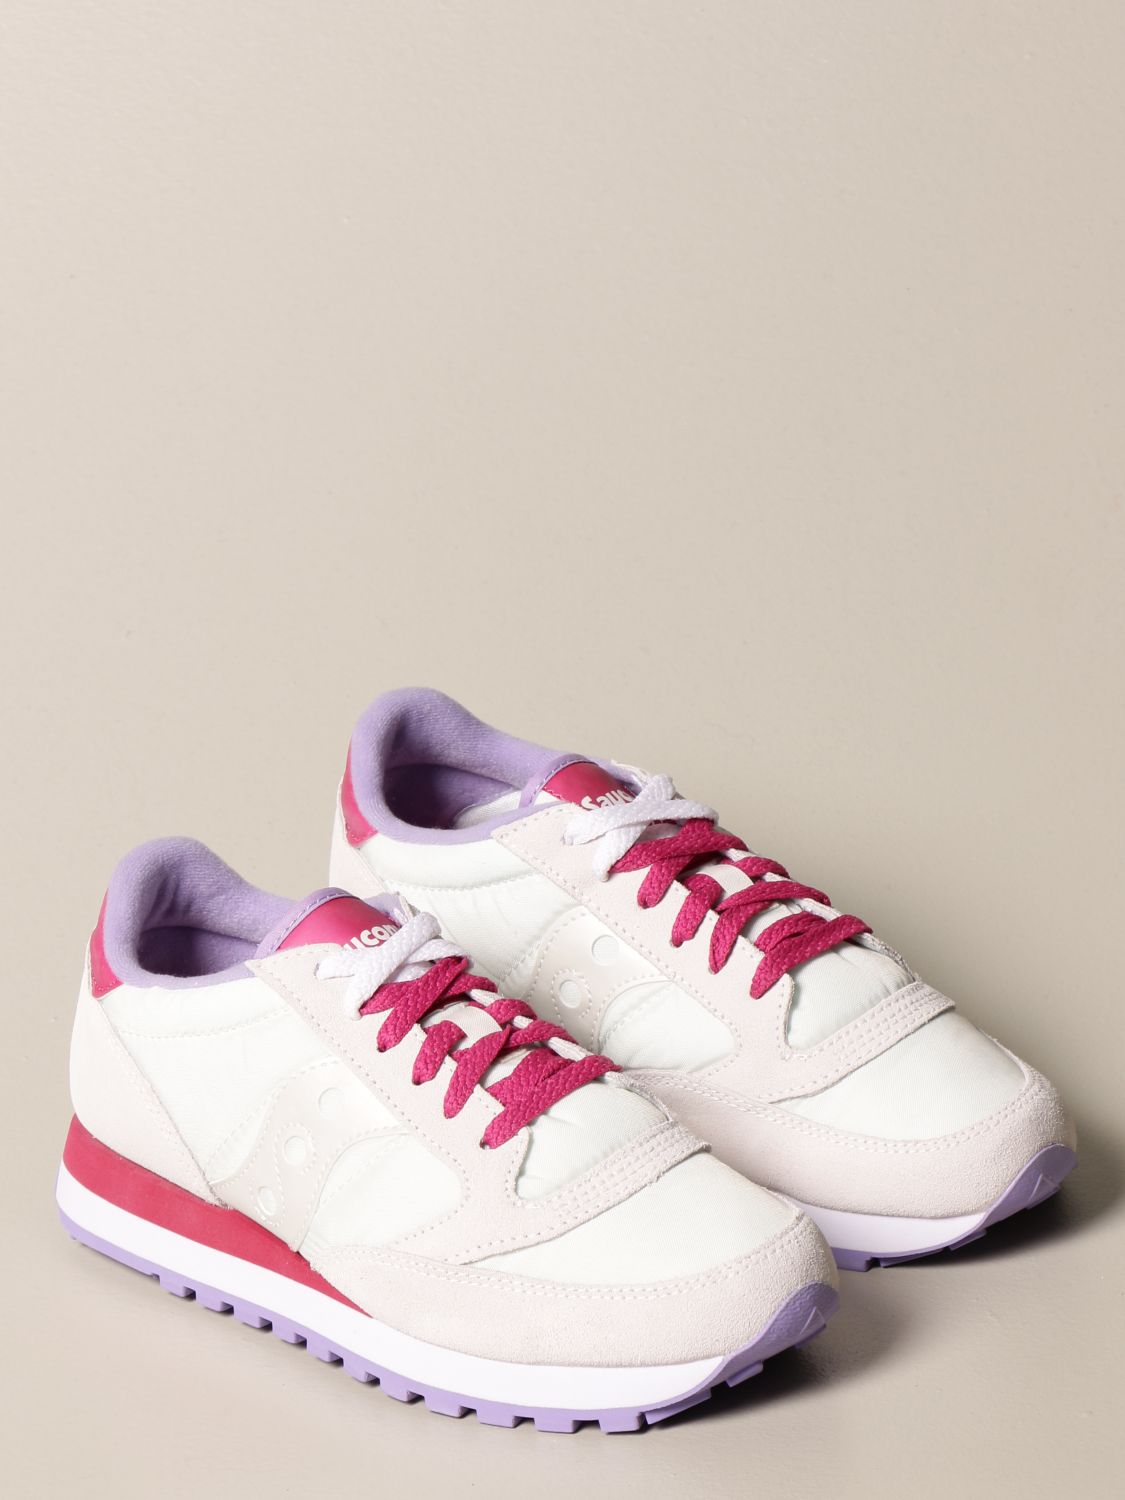 saucony chaussures femme rose